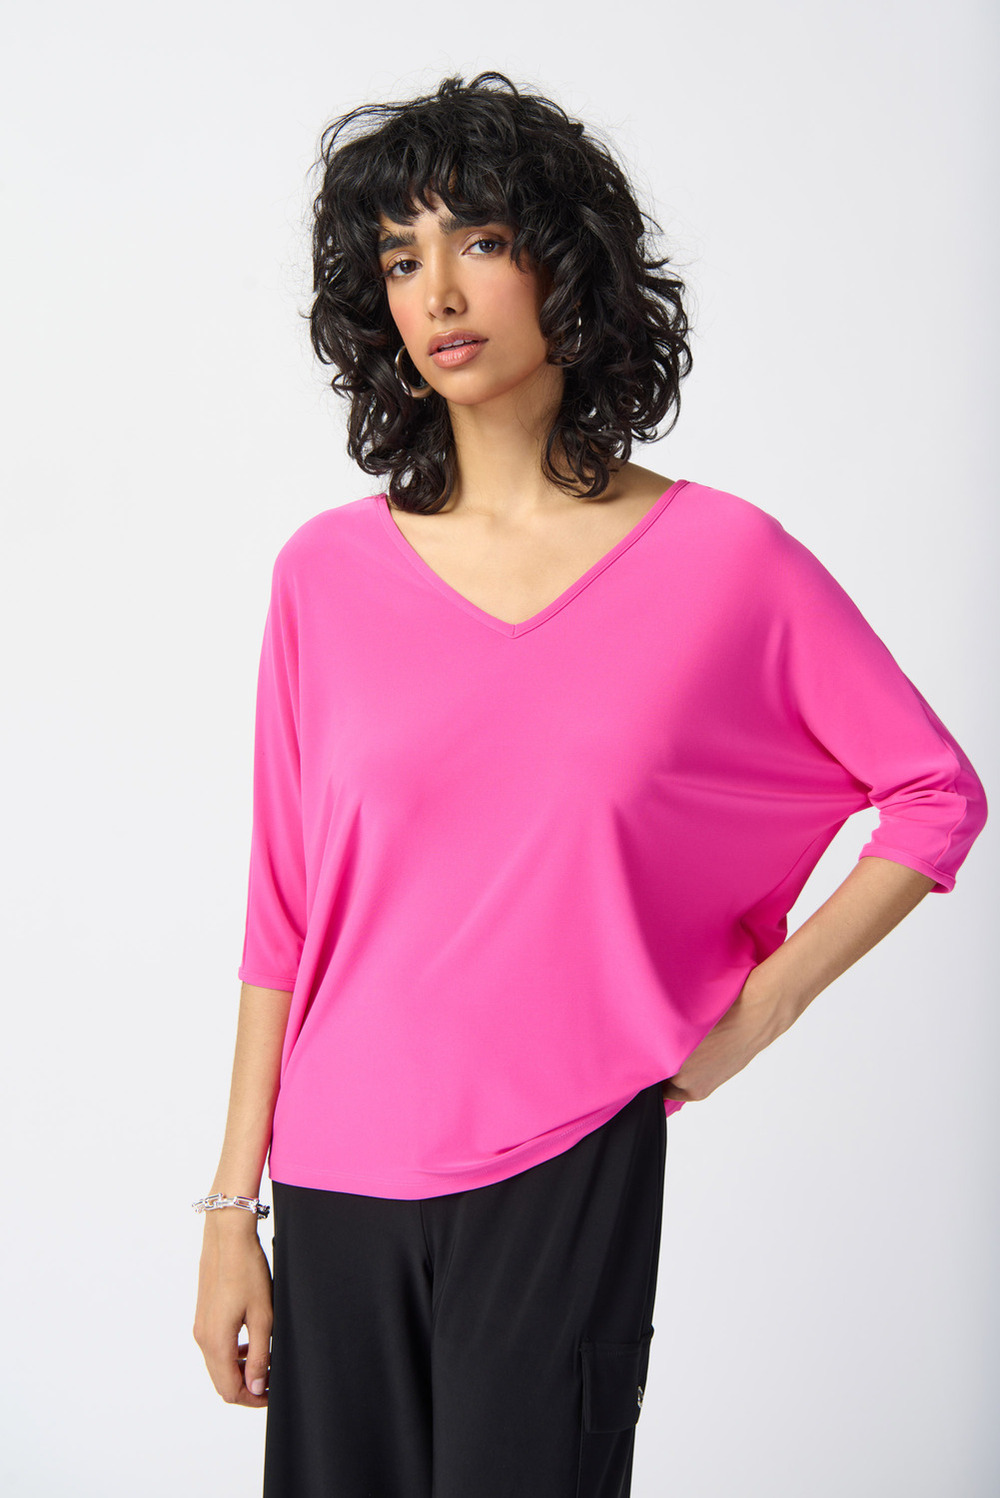 Oversized Bat Wing Sleeve Top Style 241044. Ultra Pink